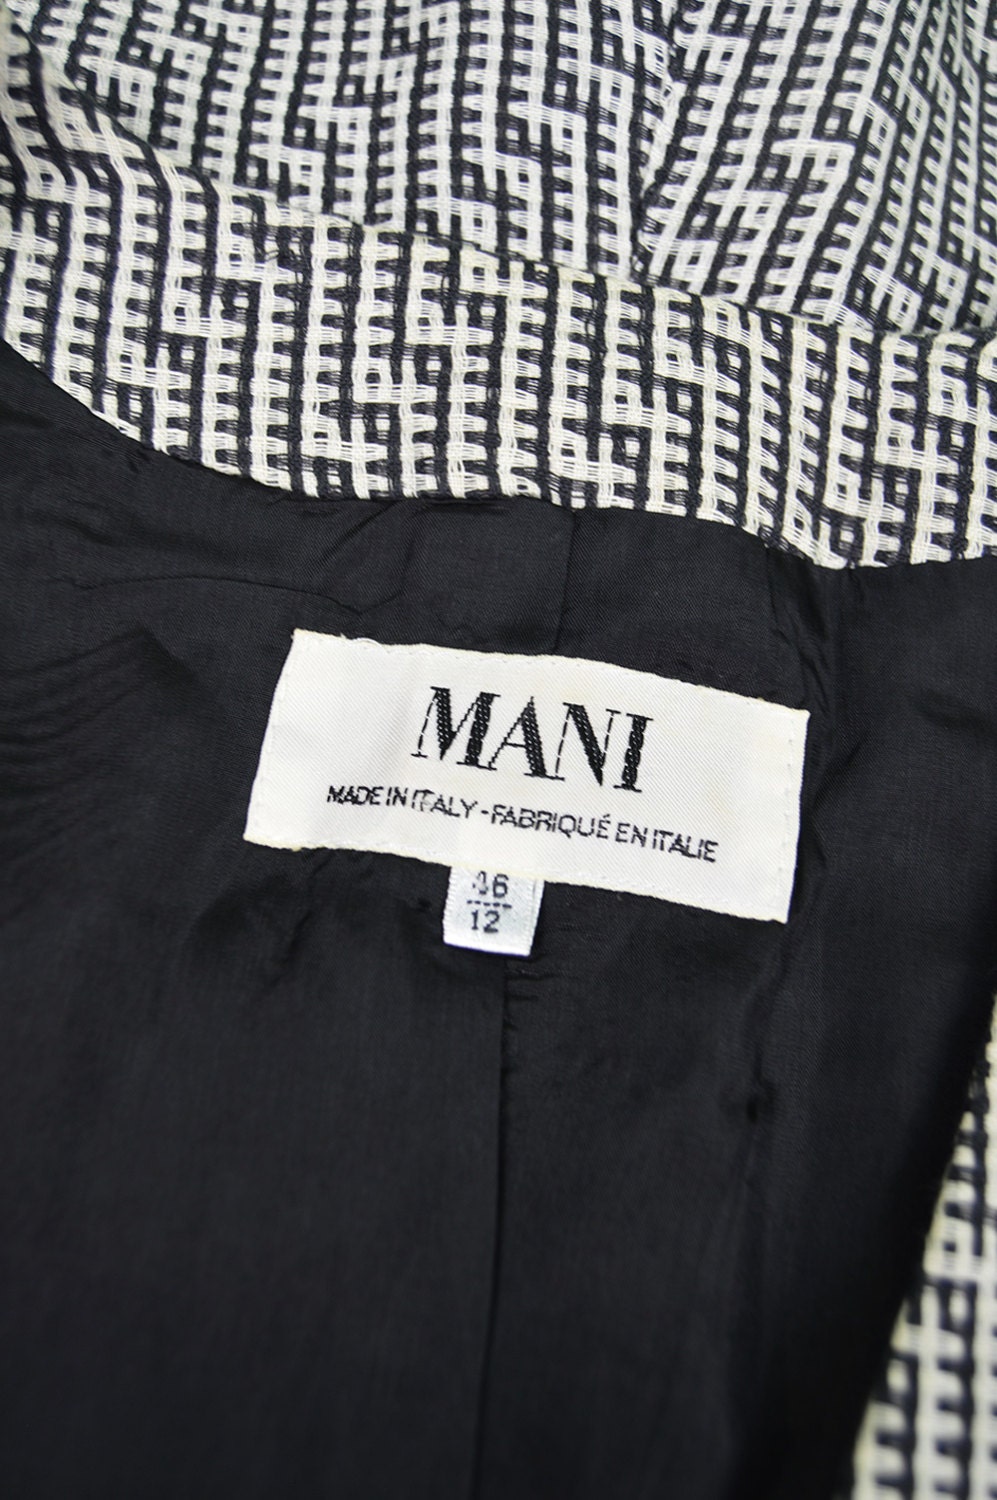 80s MANI by ARMANI Black & White Made in Italy Woven Linen - Etsy UK